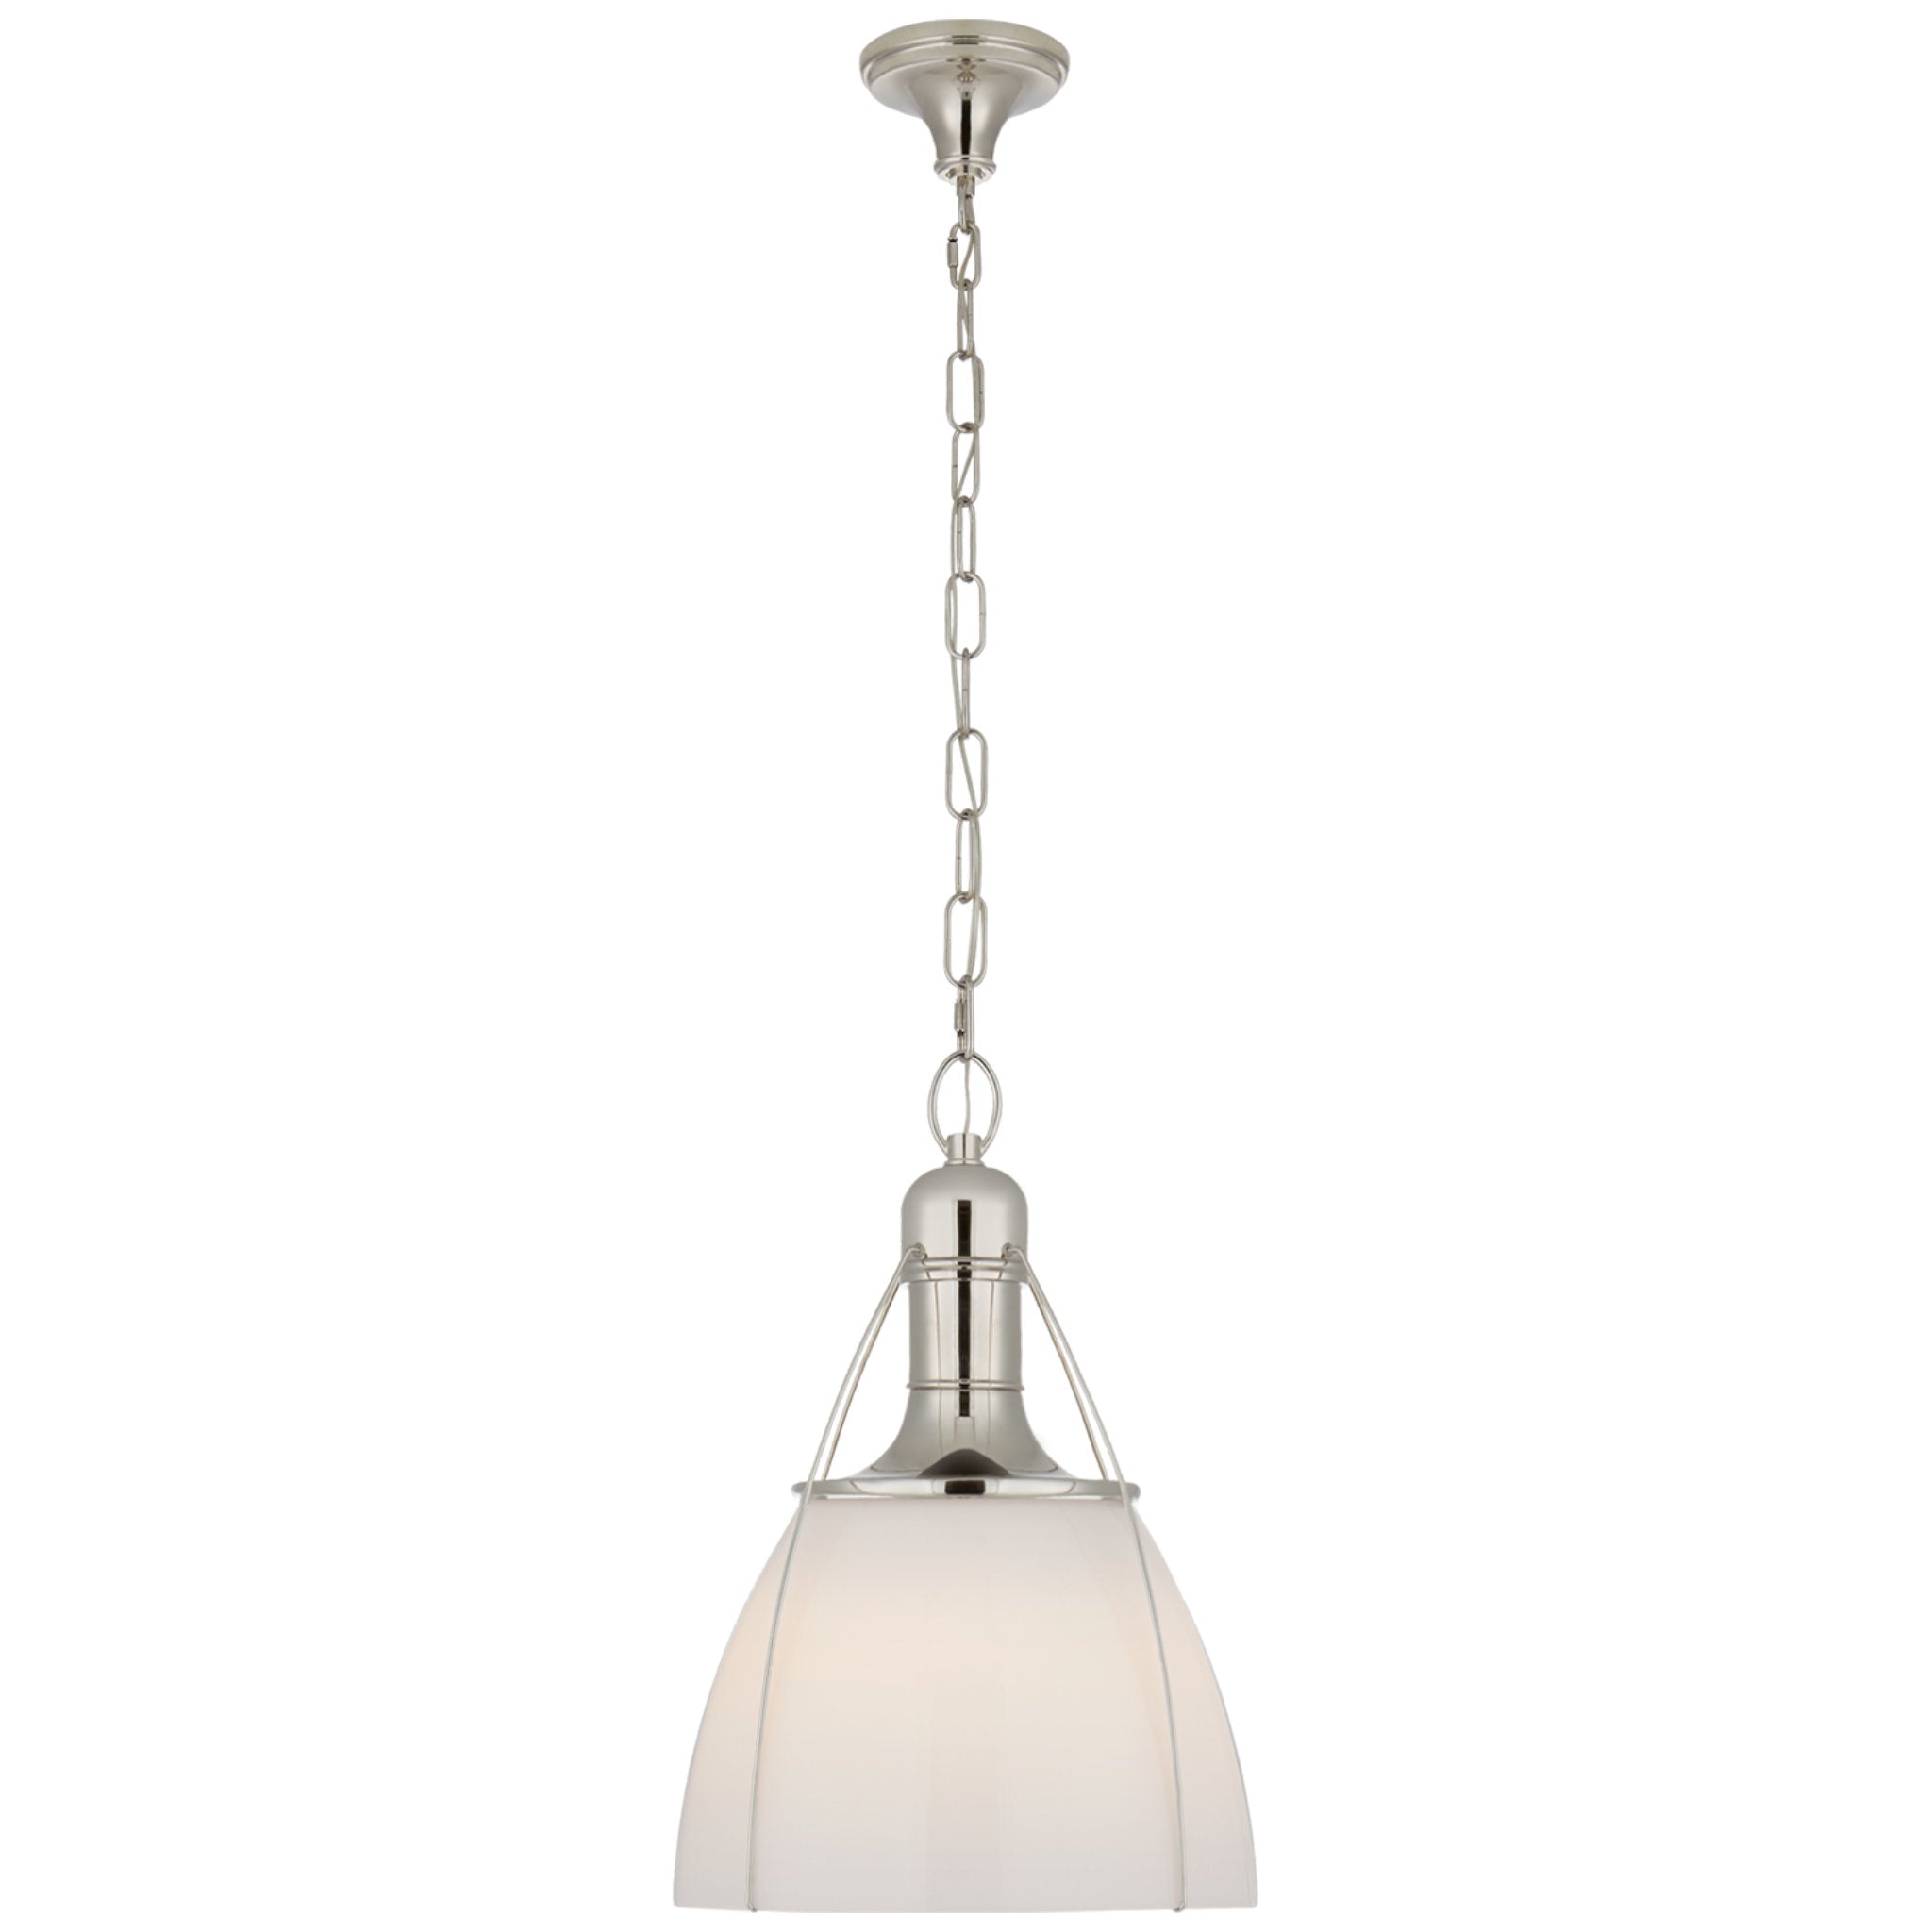 Chapman & Myers Prestwick 18" Pendant in Polished Nickel with White Glass